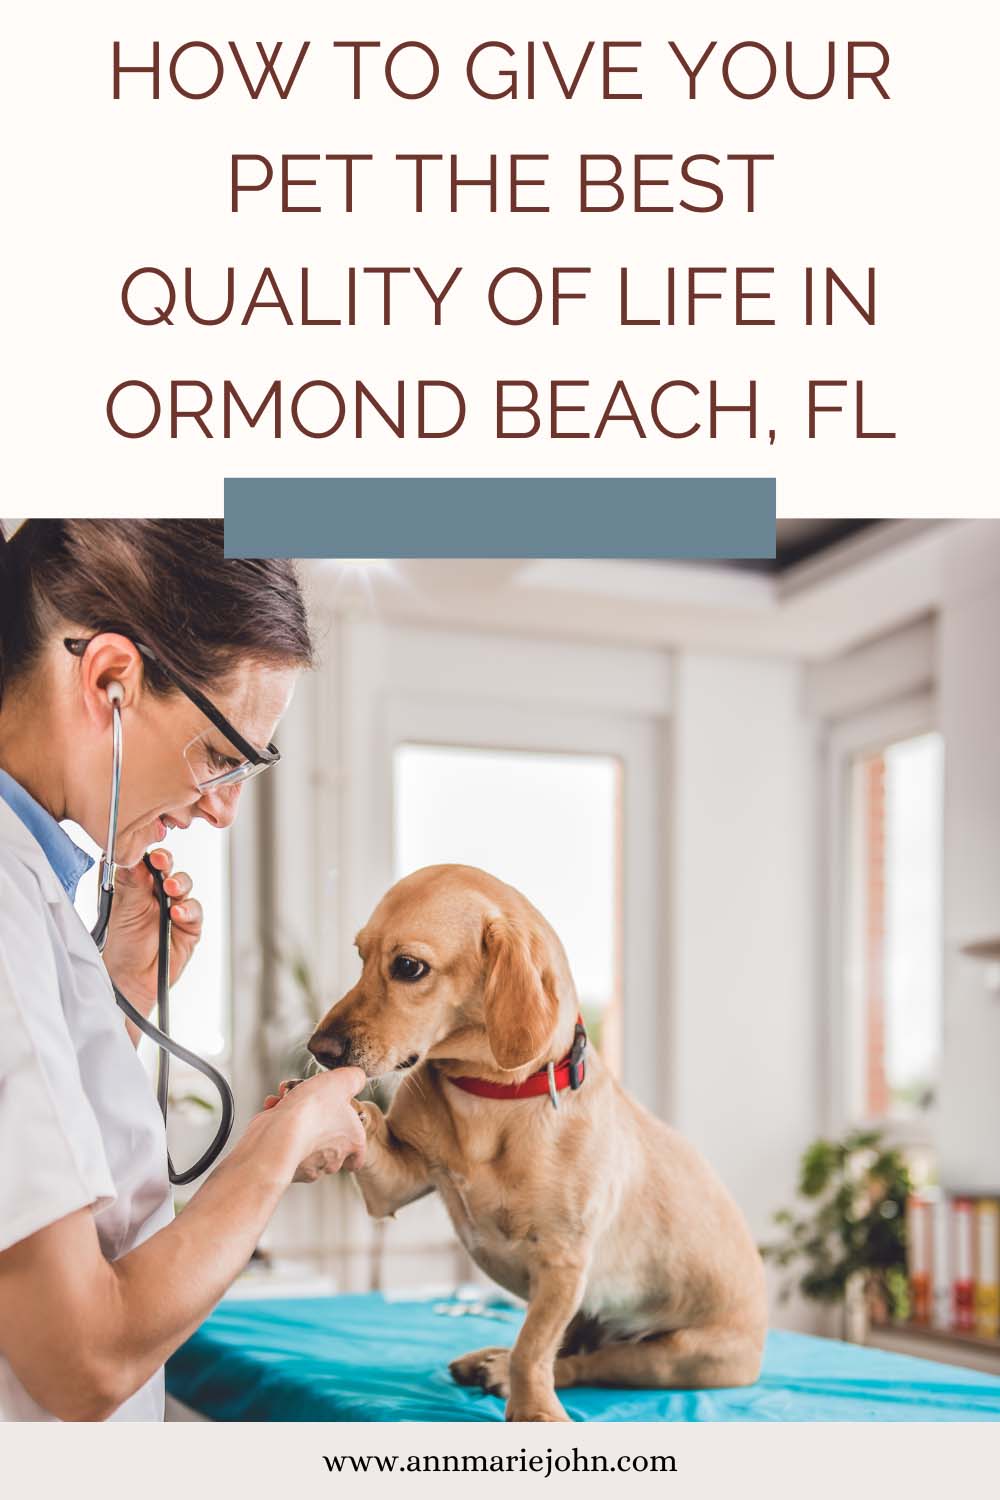 How to Give Your Pet the Best Quality of Life in Ormond Beach, FL